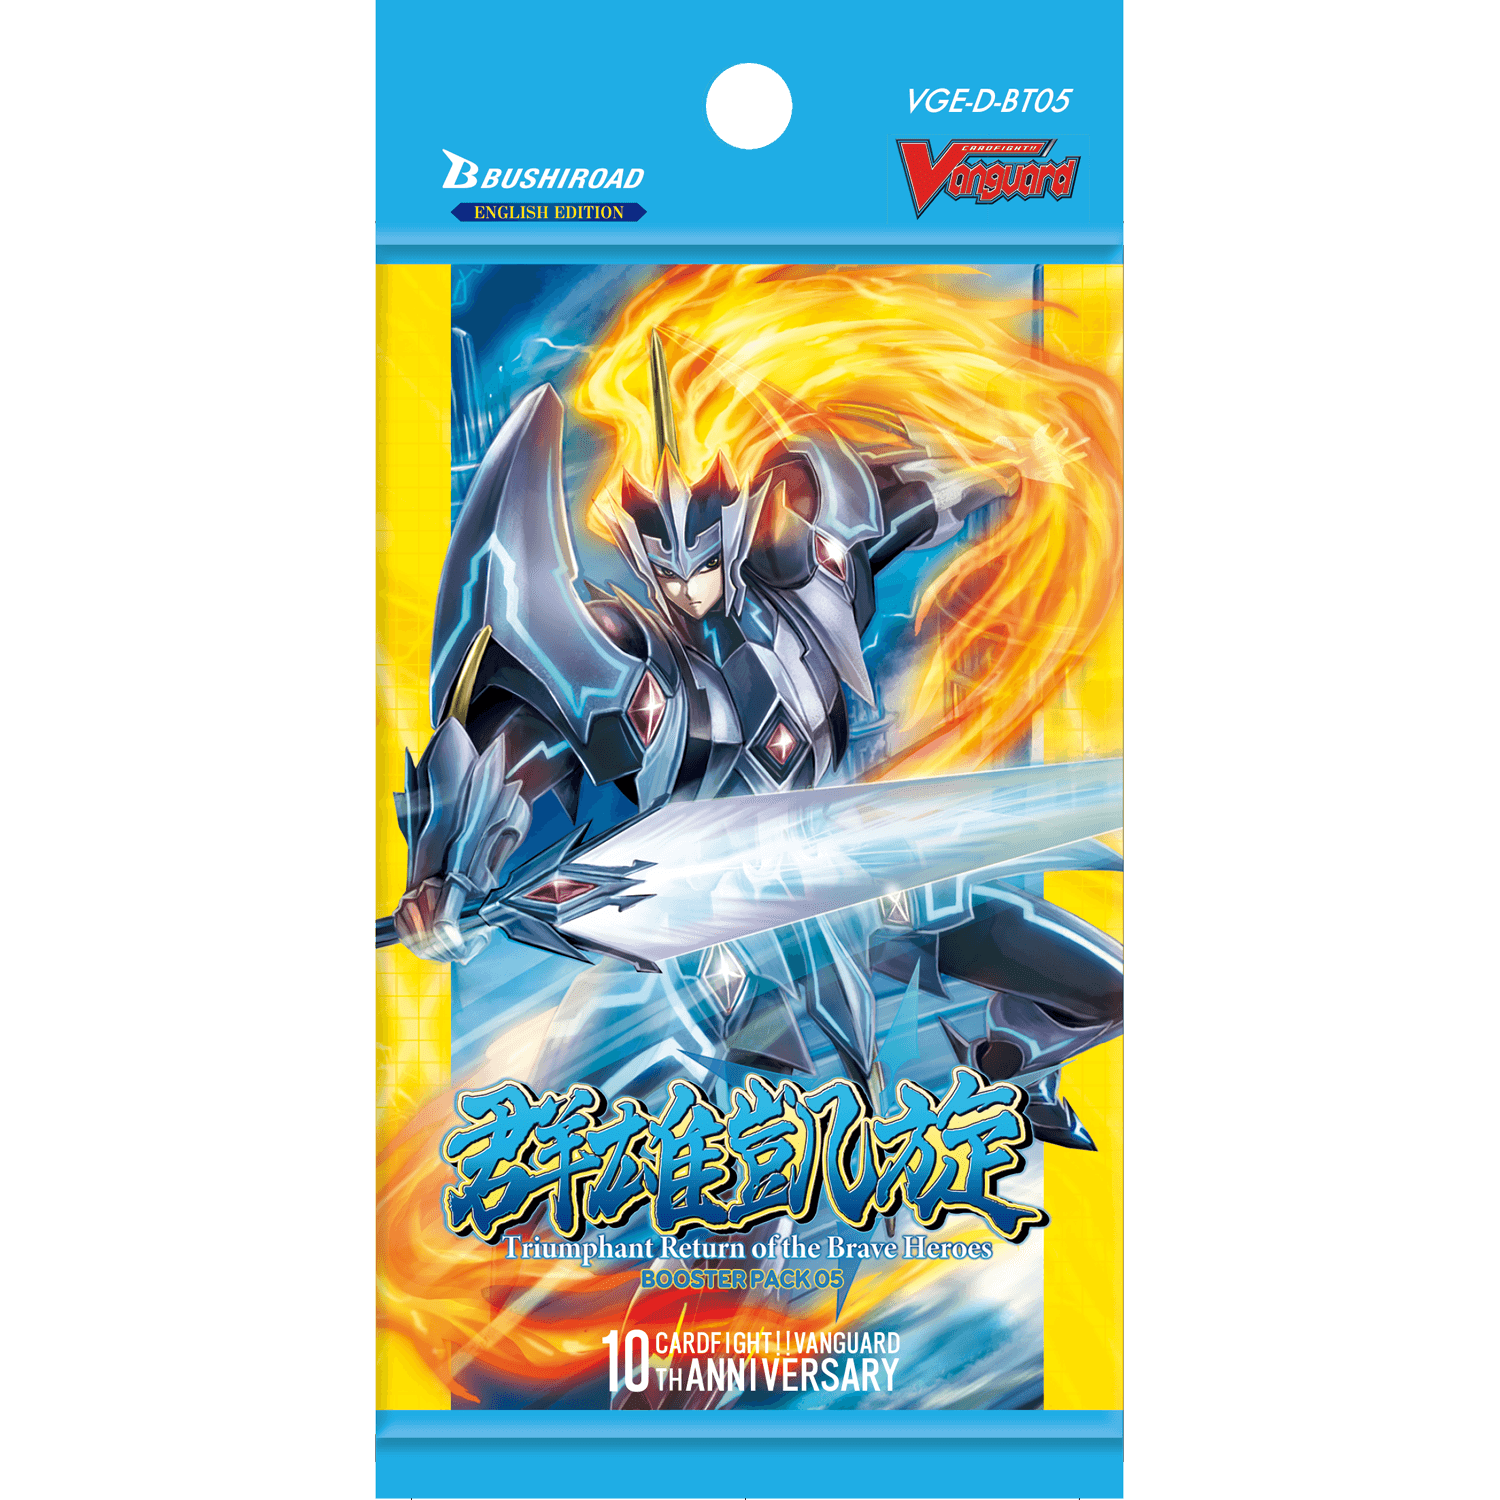 Cardfight!! Vanguard - Triumphant Return of the Brave Heroes Booster Box - The Card Vault